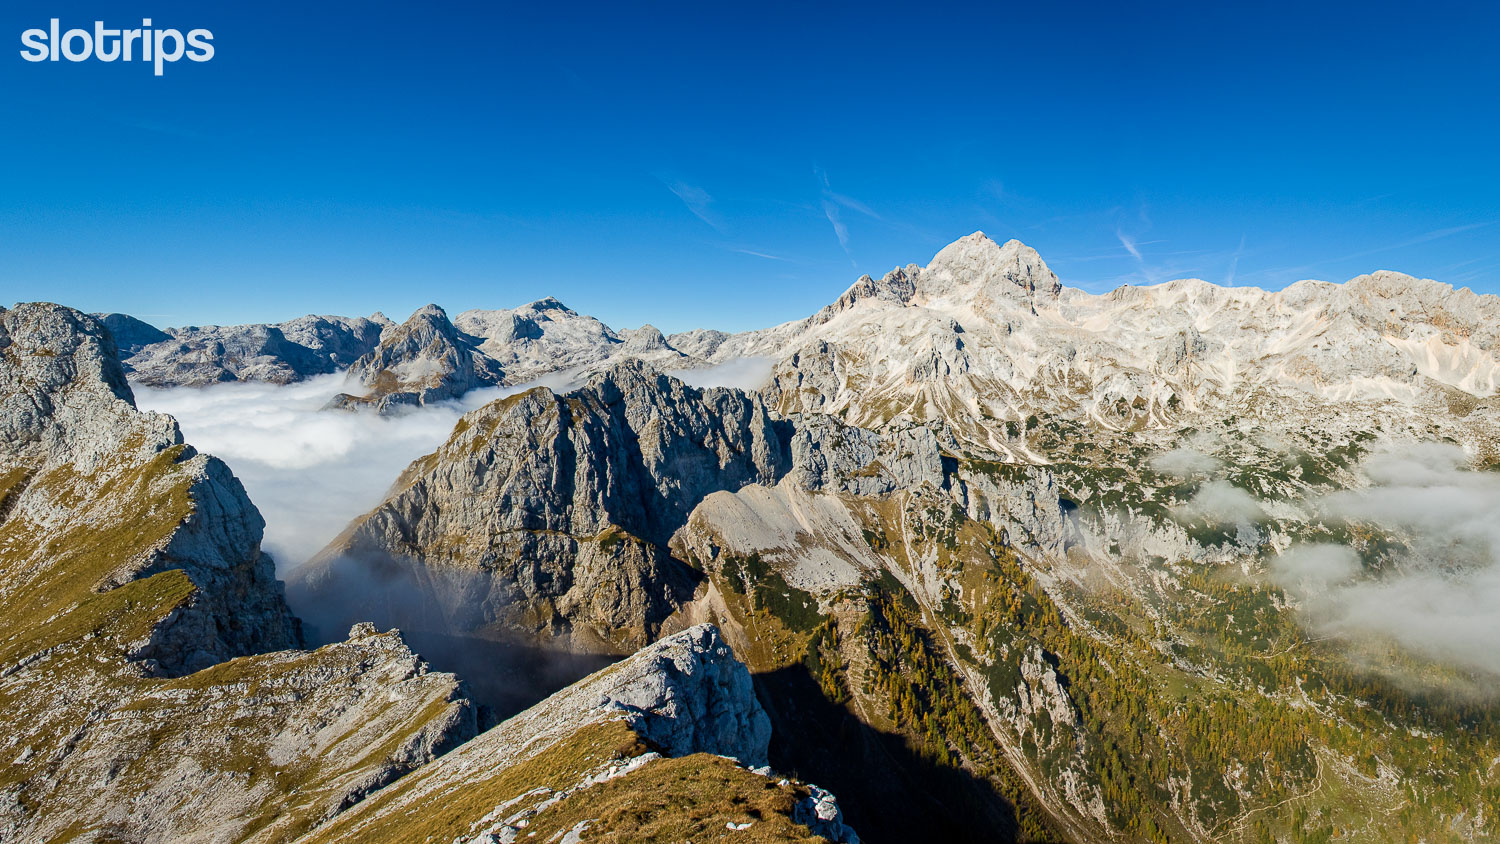 Views of Mt. Triglav and the central Julian Alps in Slovenia